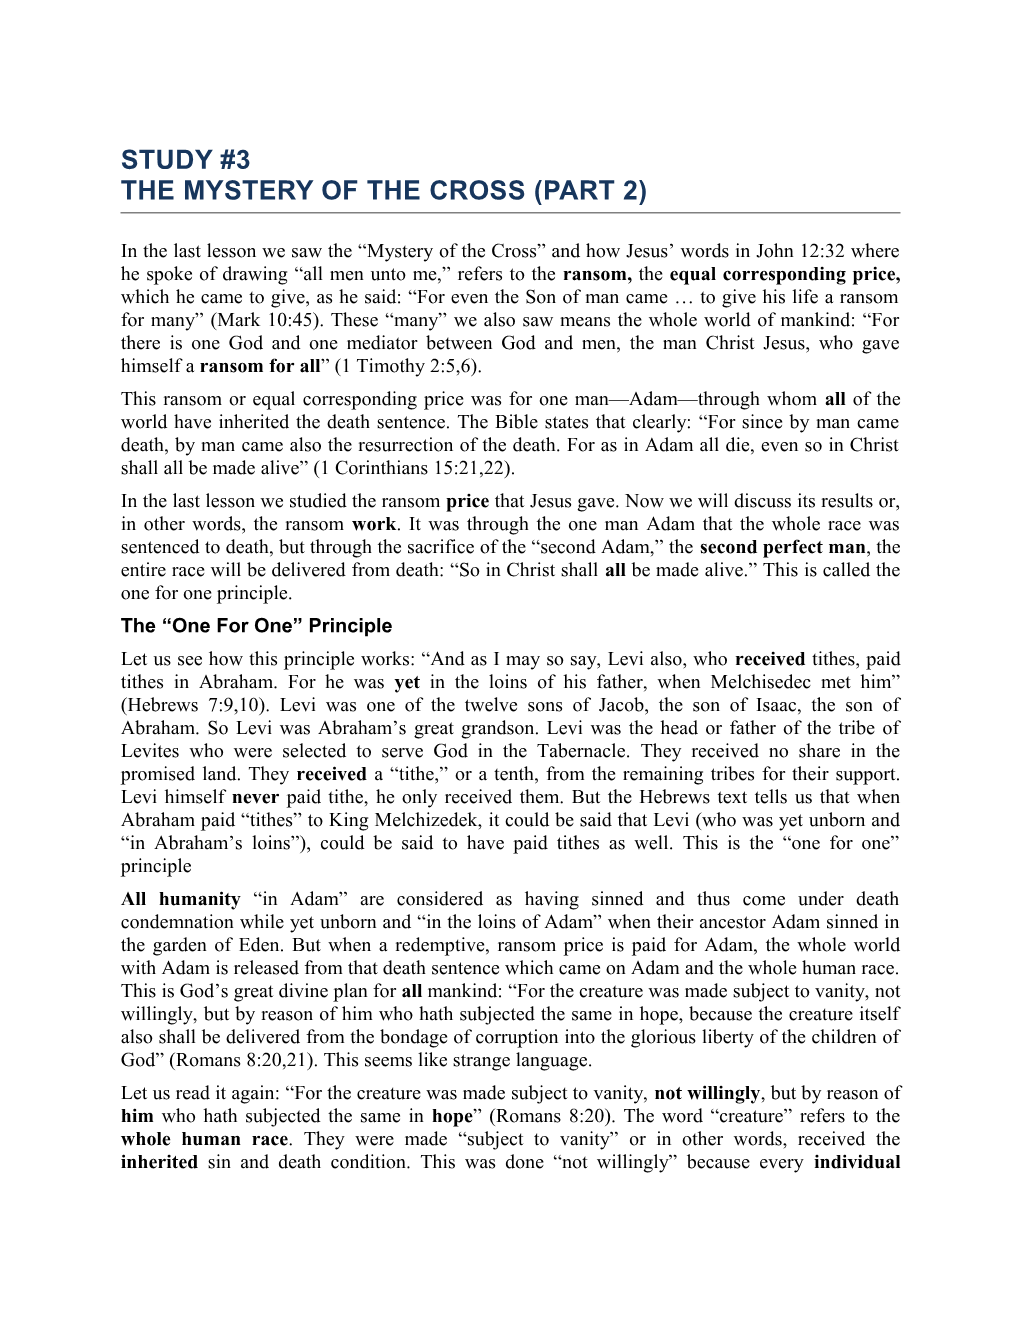 Study #3 the Mystery of the Cross (Part 2)